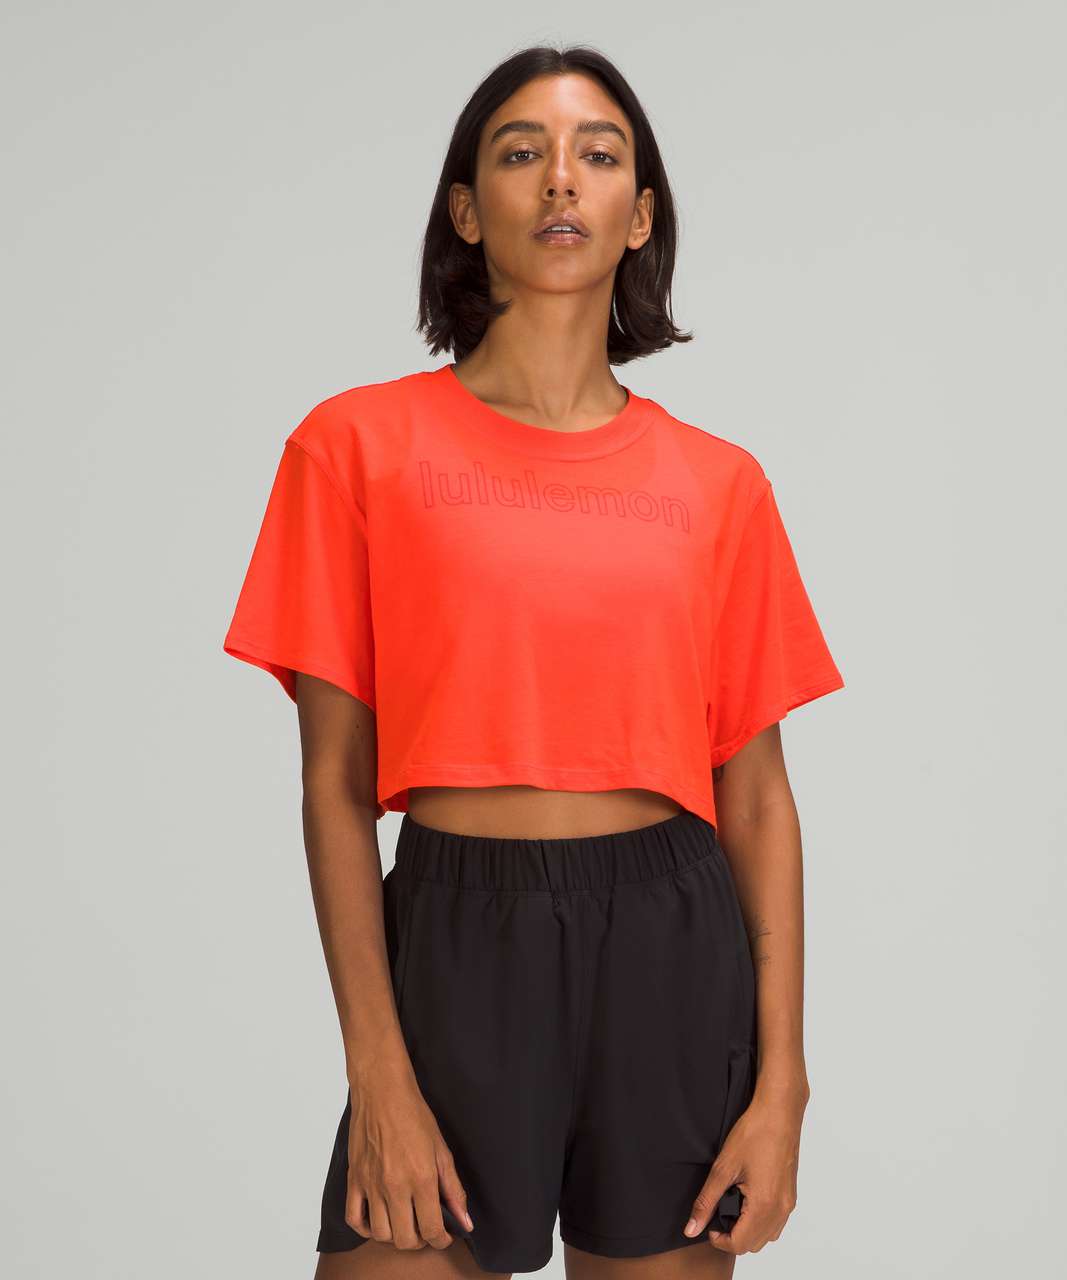 Lululemon All Yours Cropped T-Shirt *Graphic - Autumn Red